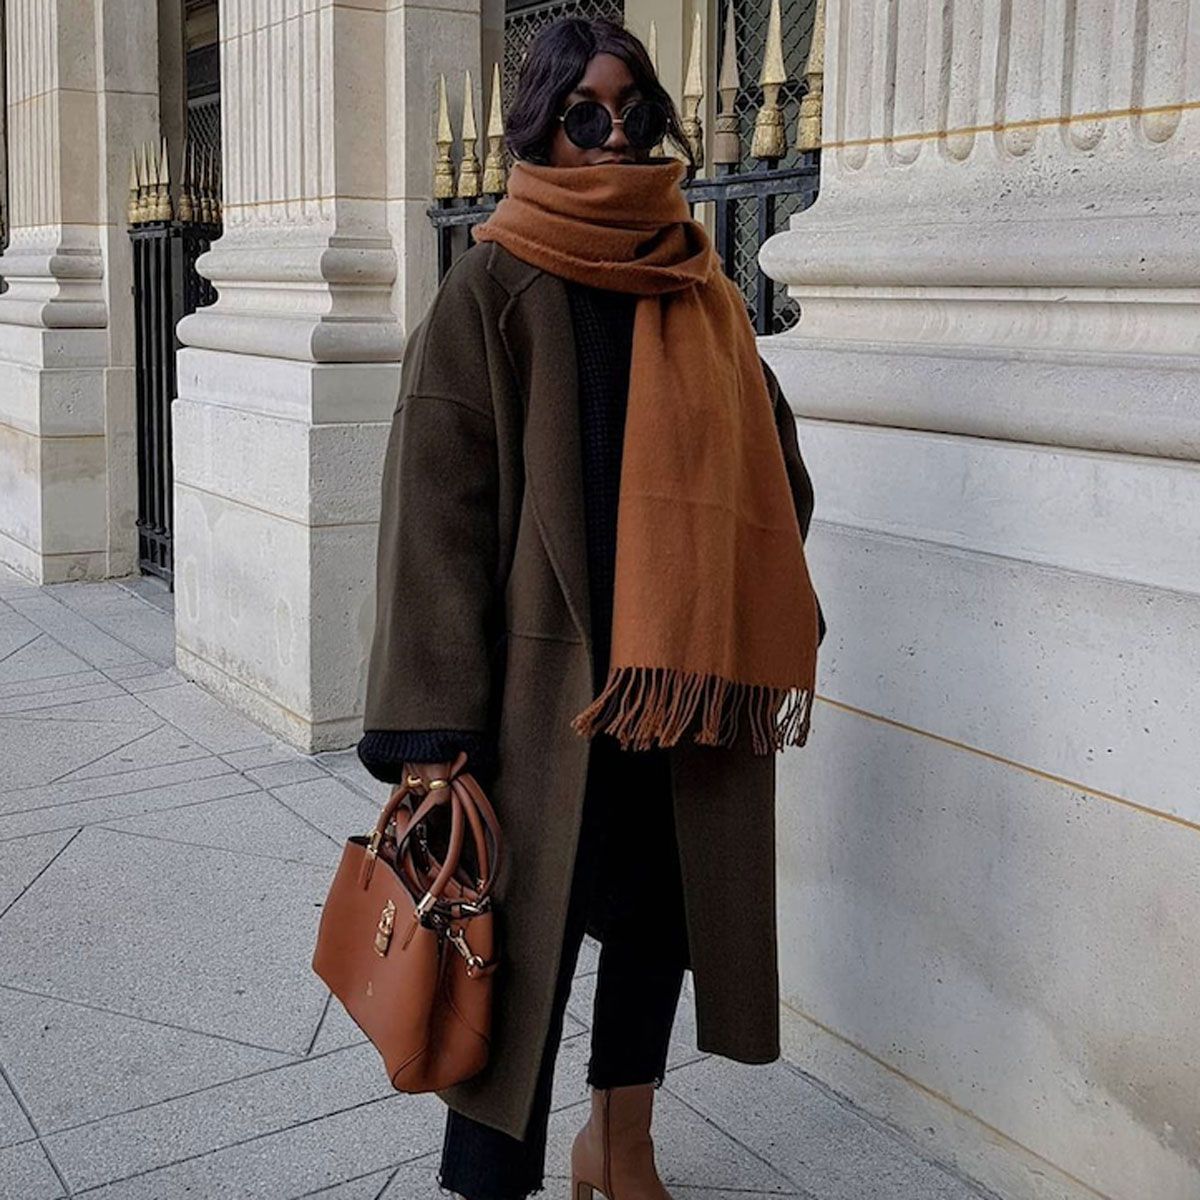 4 Coat Outfit Ideas That Are Chic and Comfortable